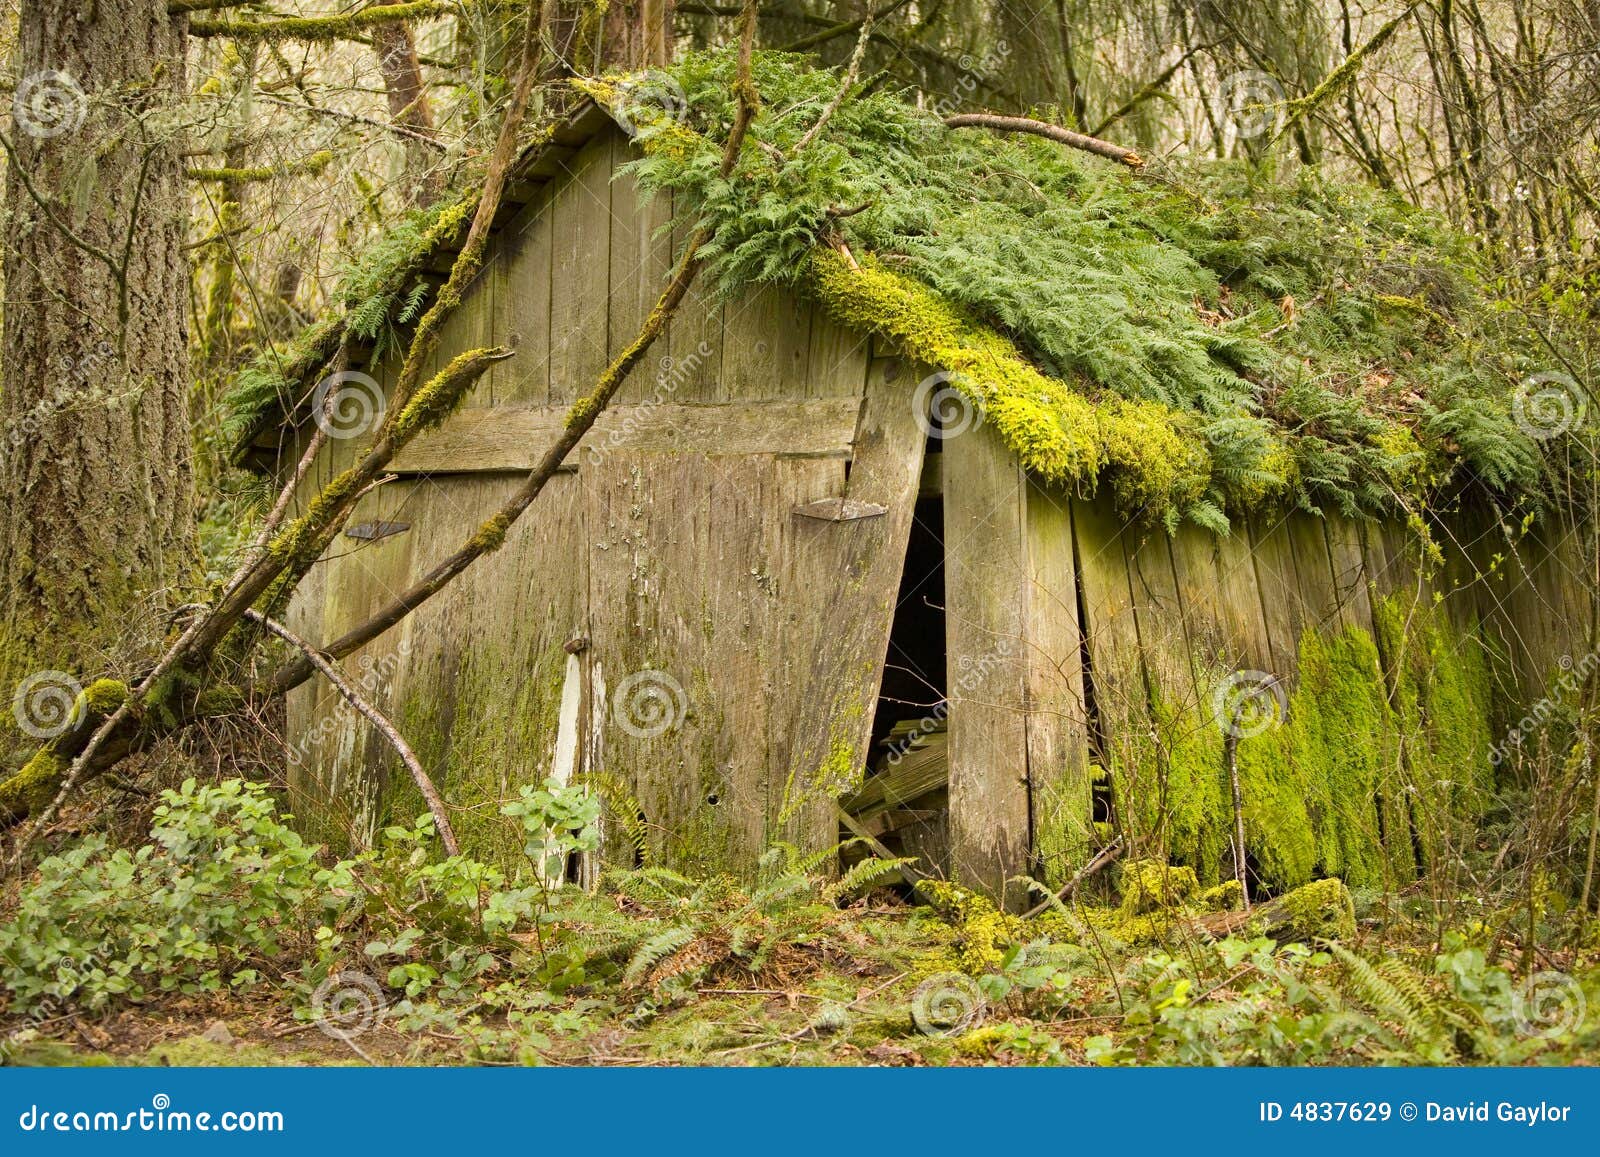 old shed in run-down condition stock image - image of wood